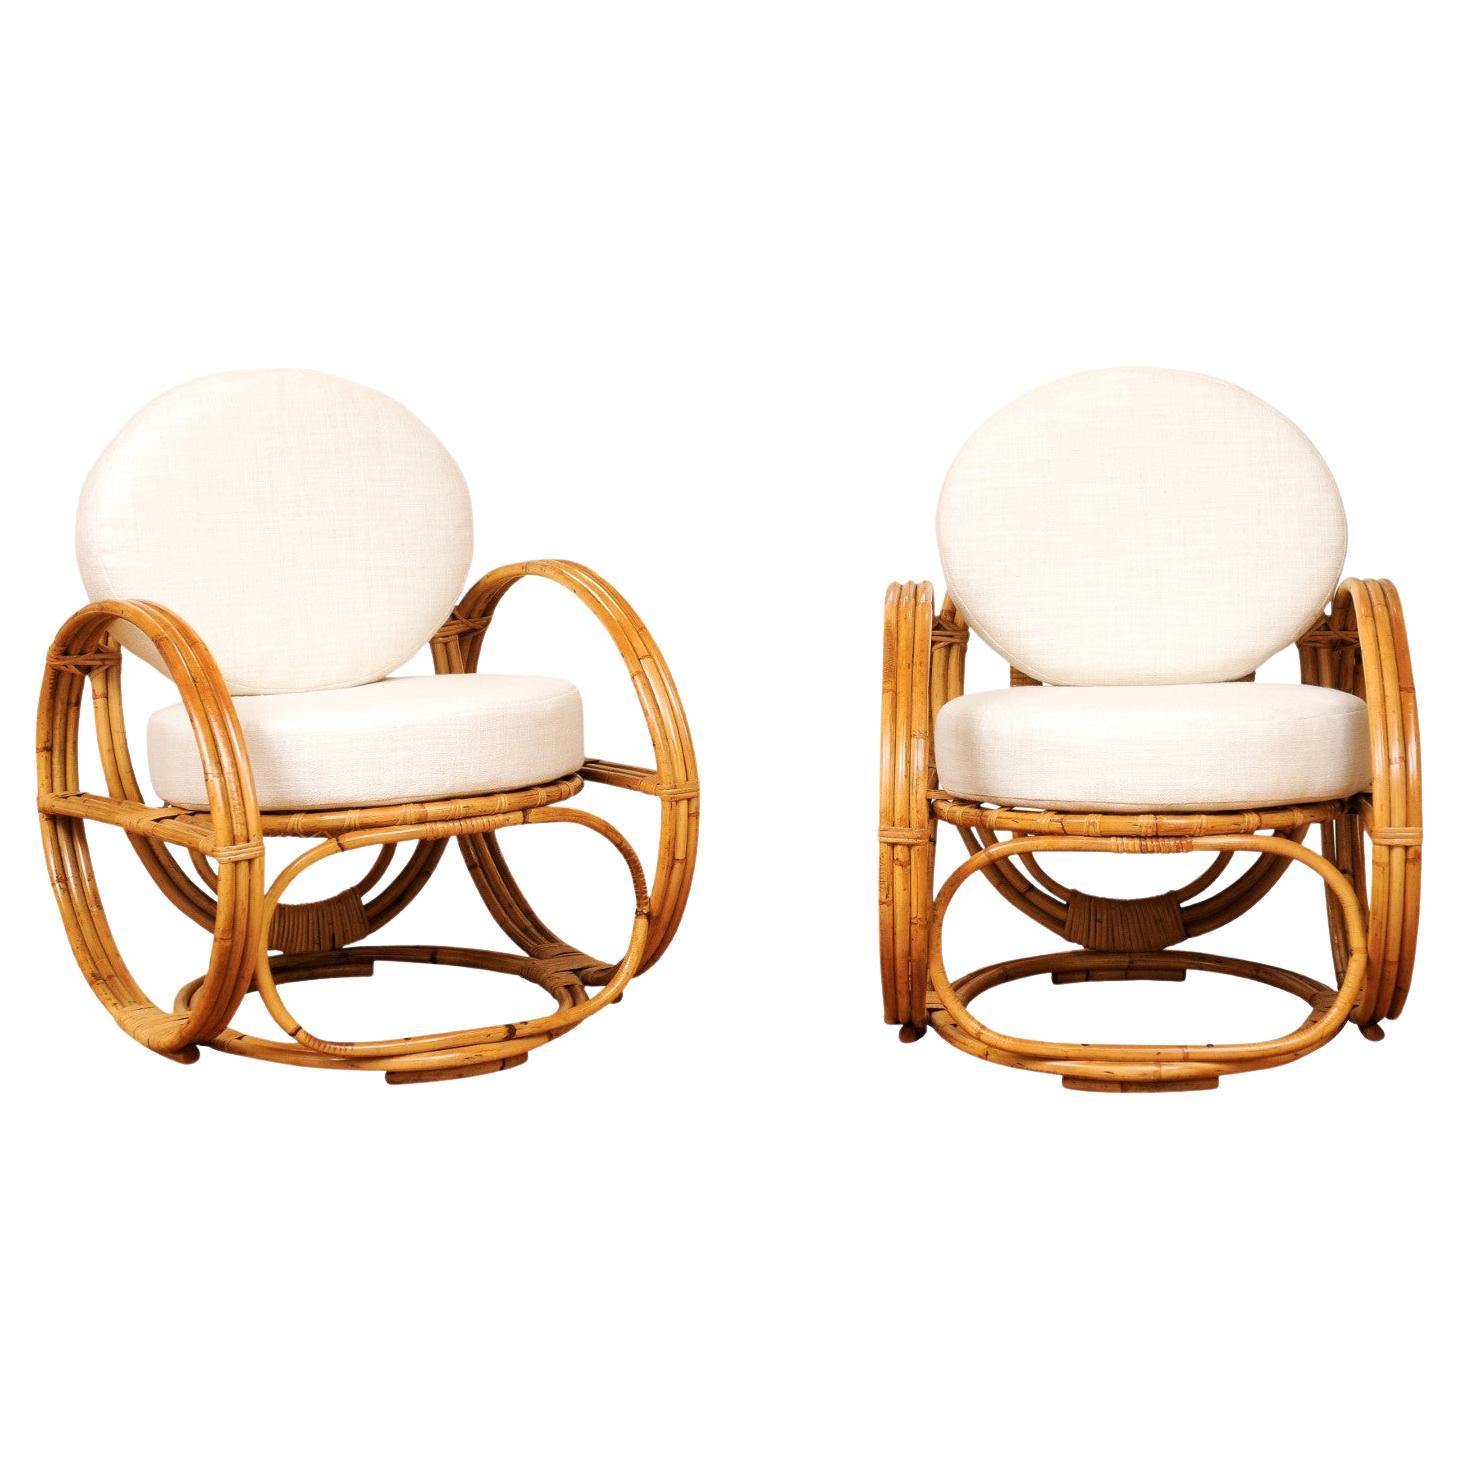 Fabulous Restored Pair of "Circles" Rattan and Cane Loungers, France, circa 1950 For Sale